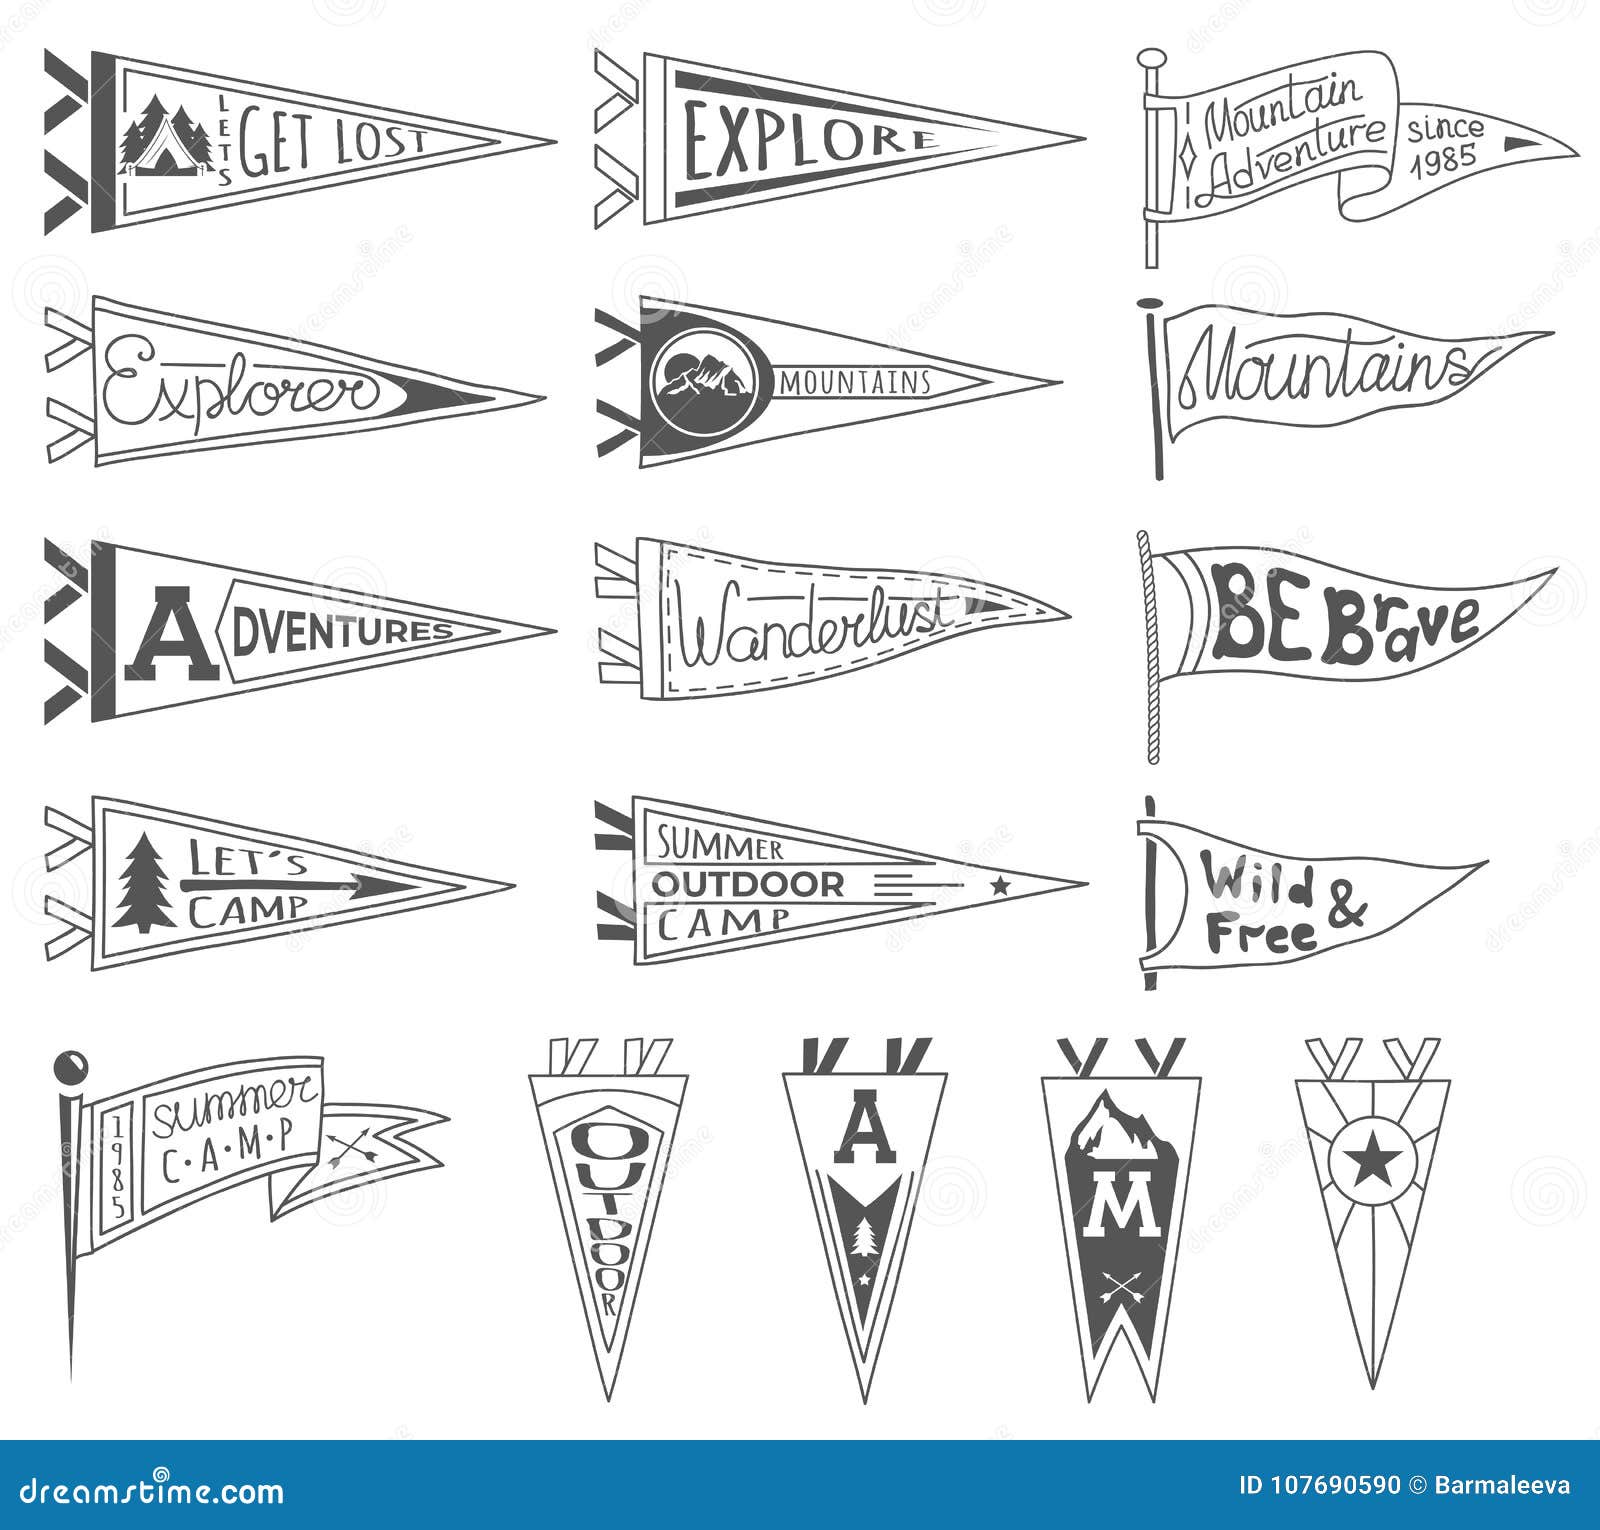 set of adventure, outdoors, camping pennants. retro monochrome labels. hand drawn wanderlust style. pennant travel flags